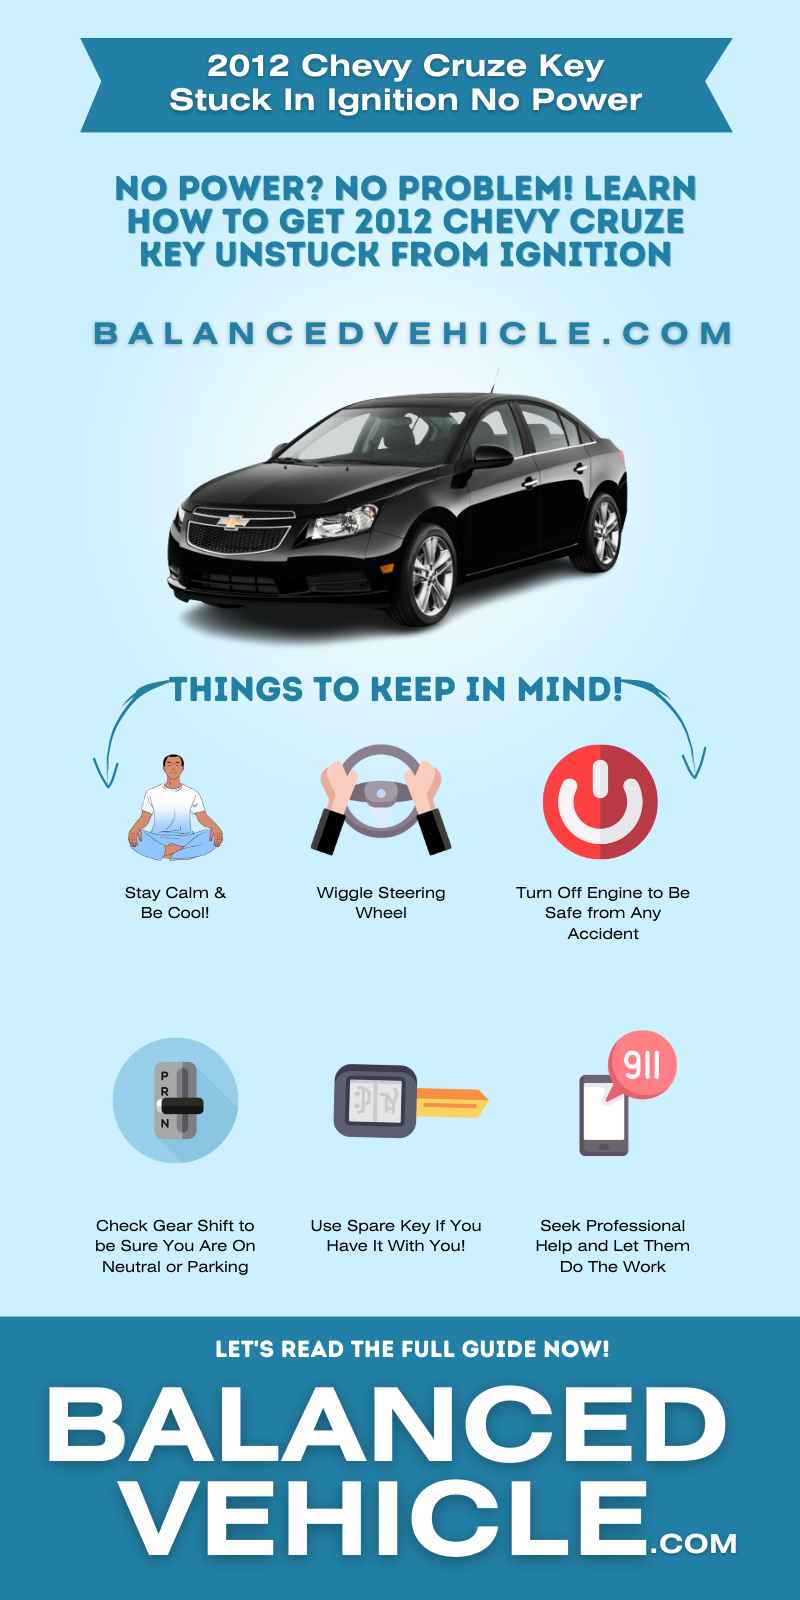 2012 Chevy Cruze Key Stuck In Ignition No Power - Infographic